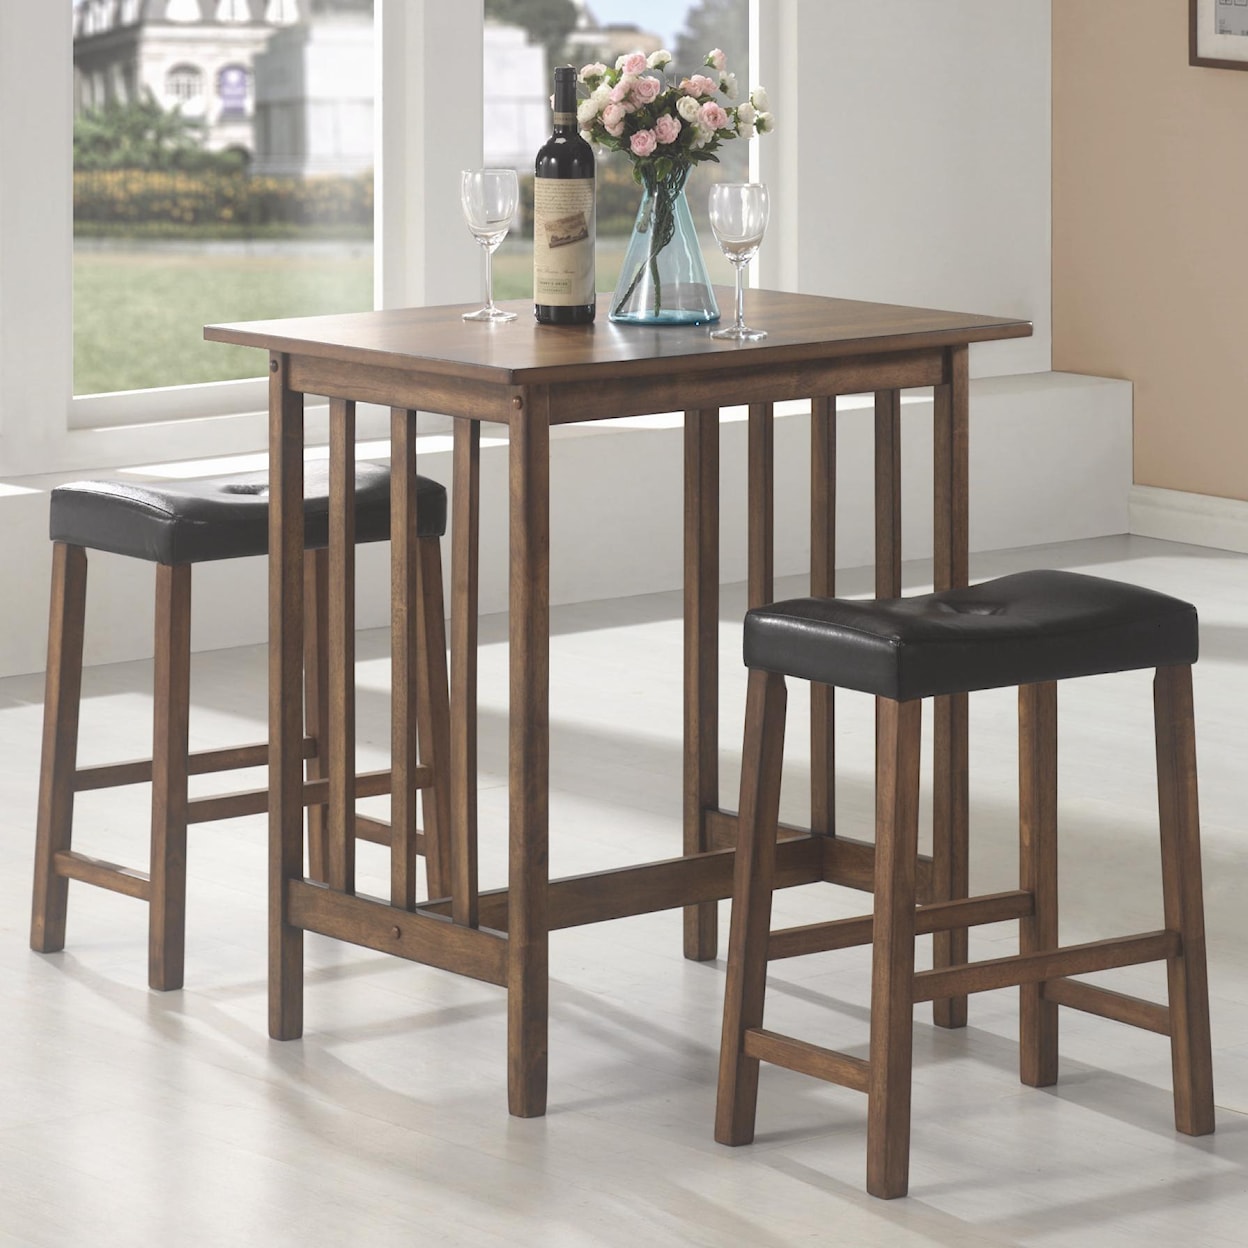 Coaster Bar Units and Bar Tables 3pc Dining Room Group